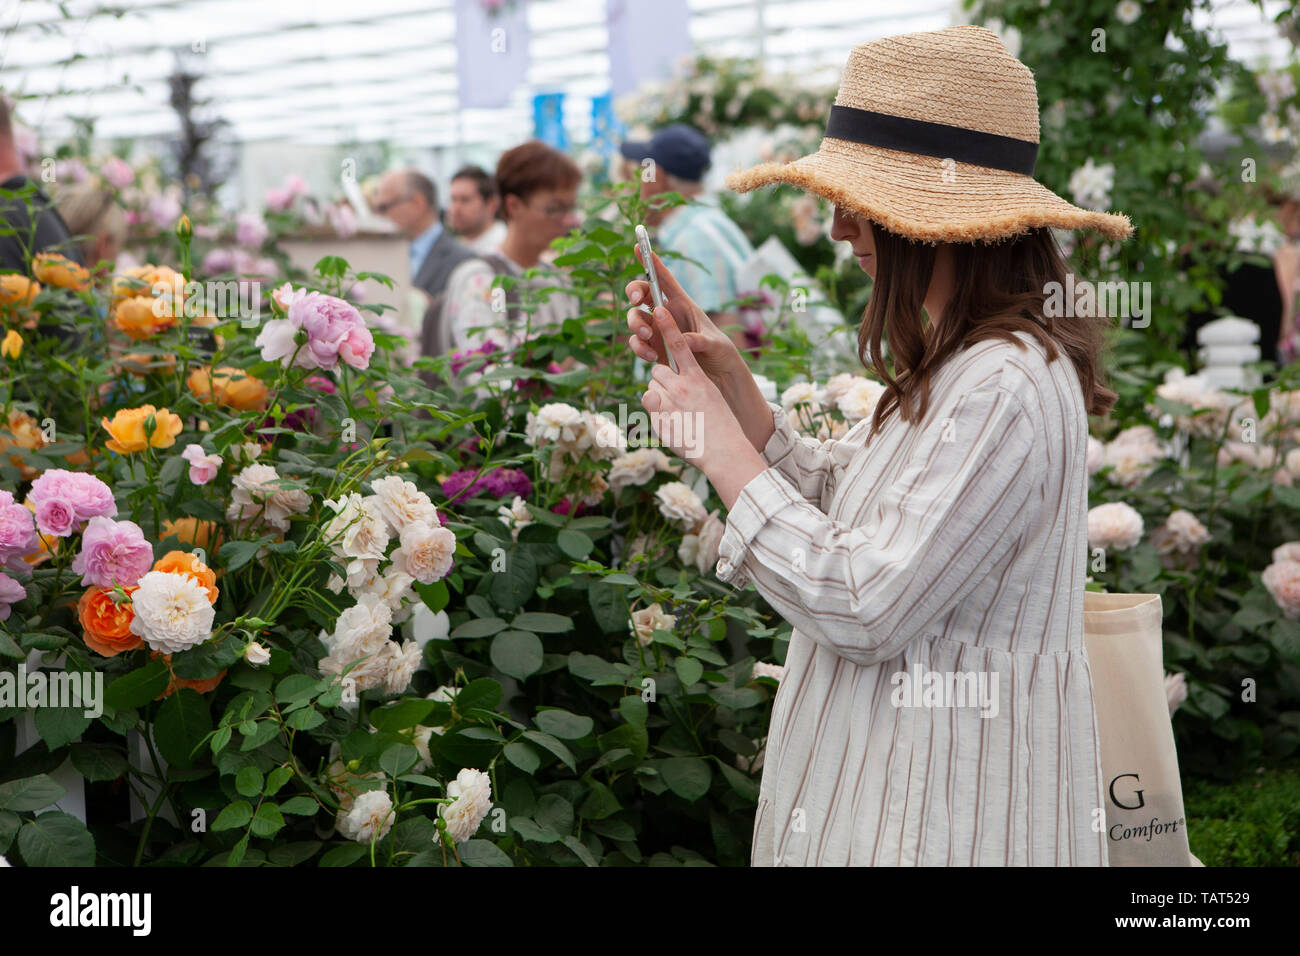 The RHS Chelsea Flower Show 2019: a young woman in a straw hat and white dress takes a photo with her phone at one of the commercial trade stands in the Great Pavillion. Stock Photo